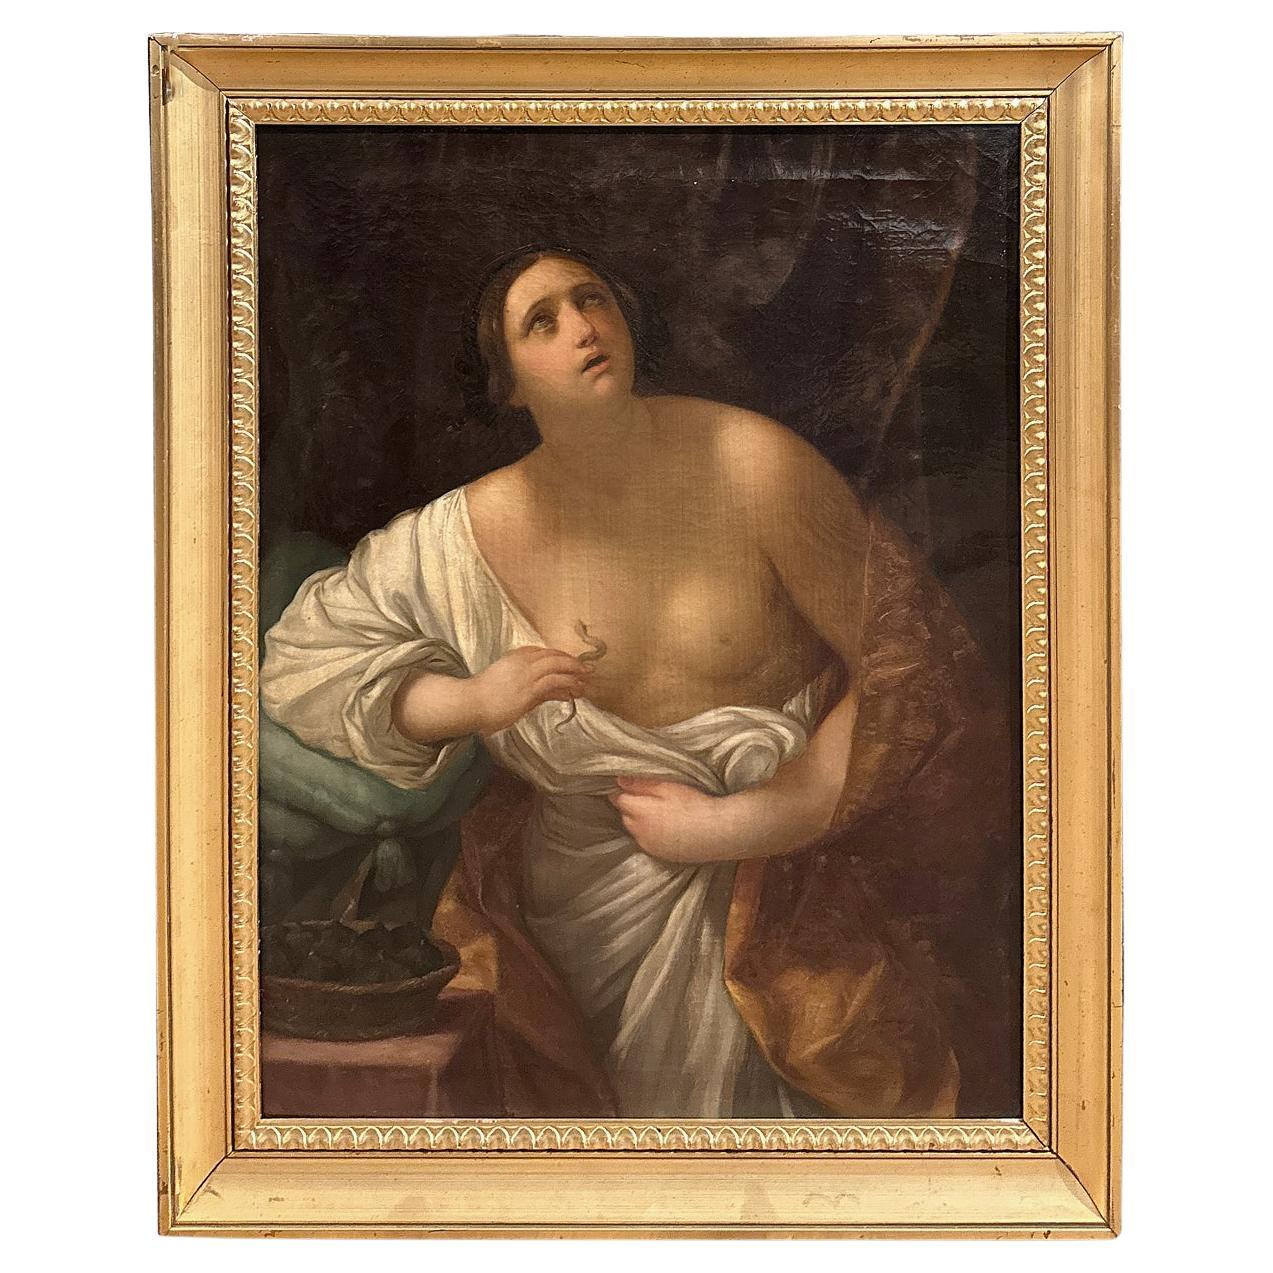 19th CENTURY OIL ON CANVAS PAINTING WITH CLEOPATRA 